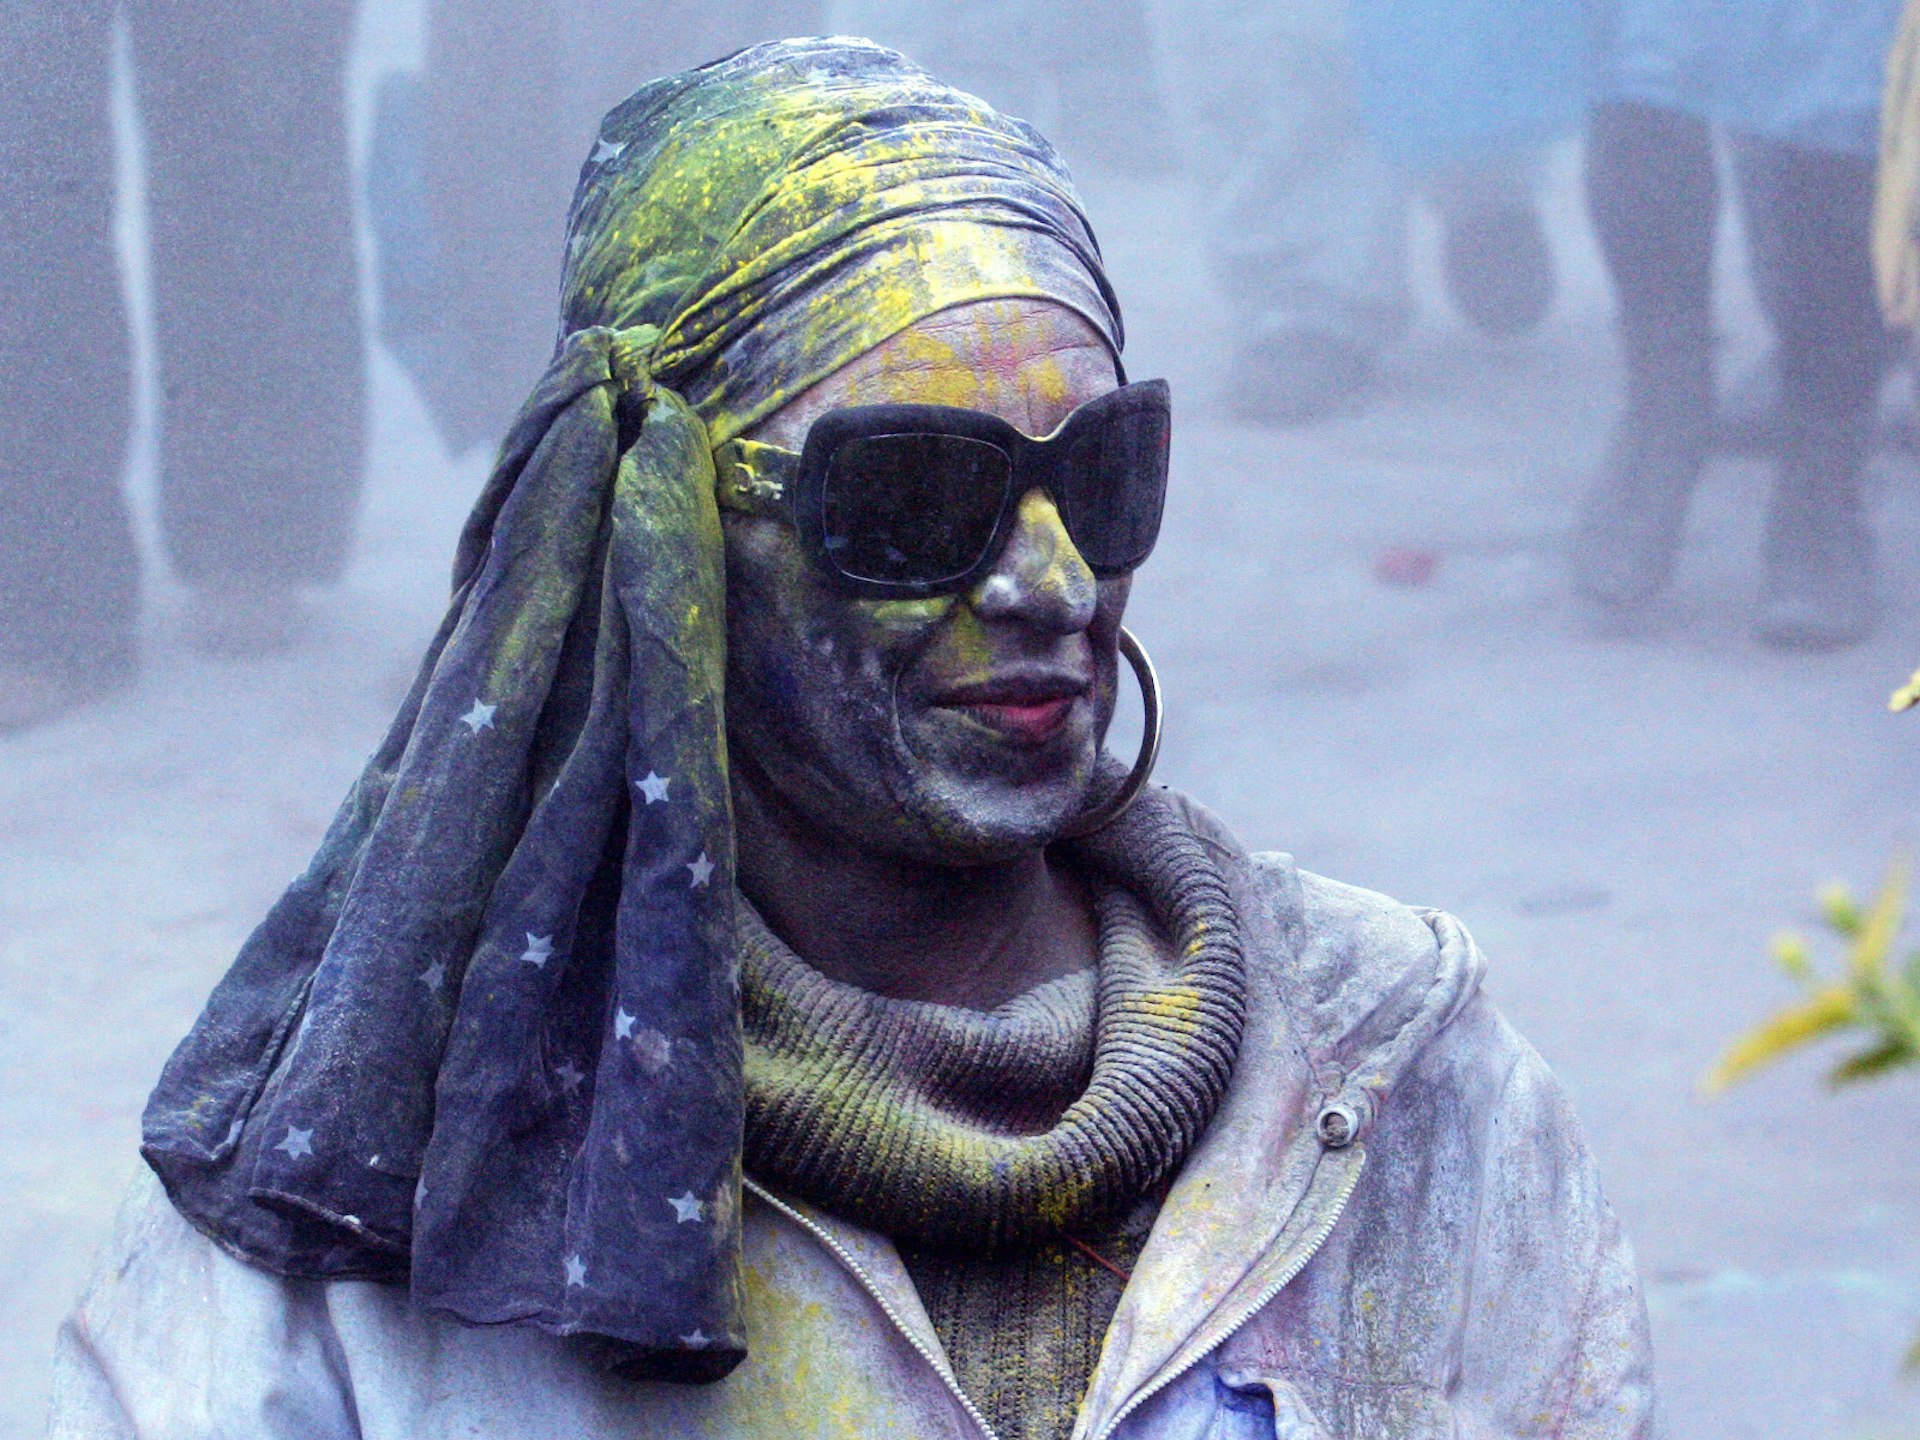 A person, wearing sunglasses and a cloth on their head, is covered in coloured pigment